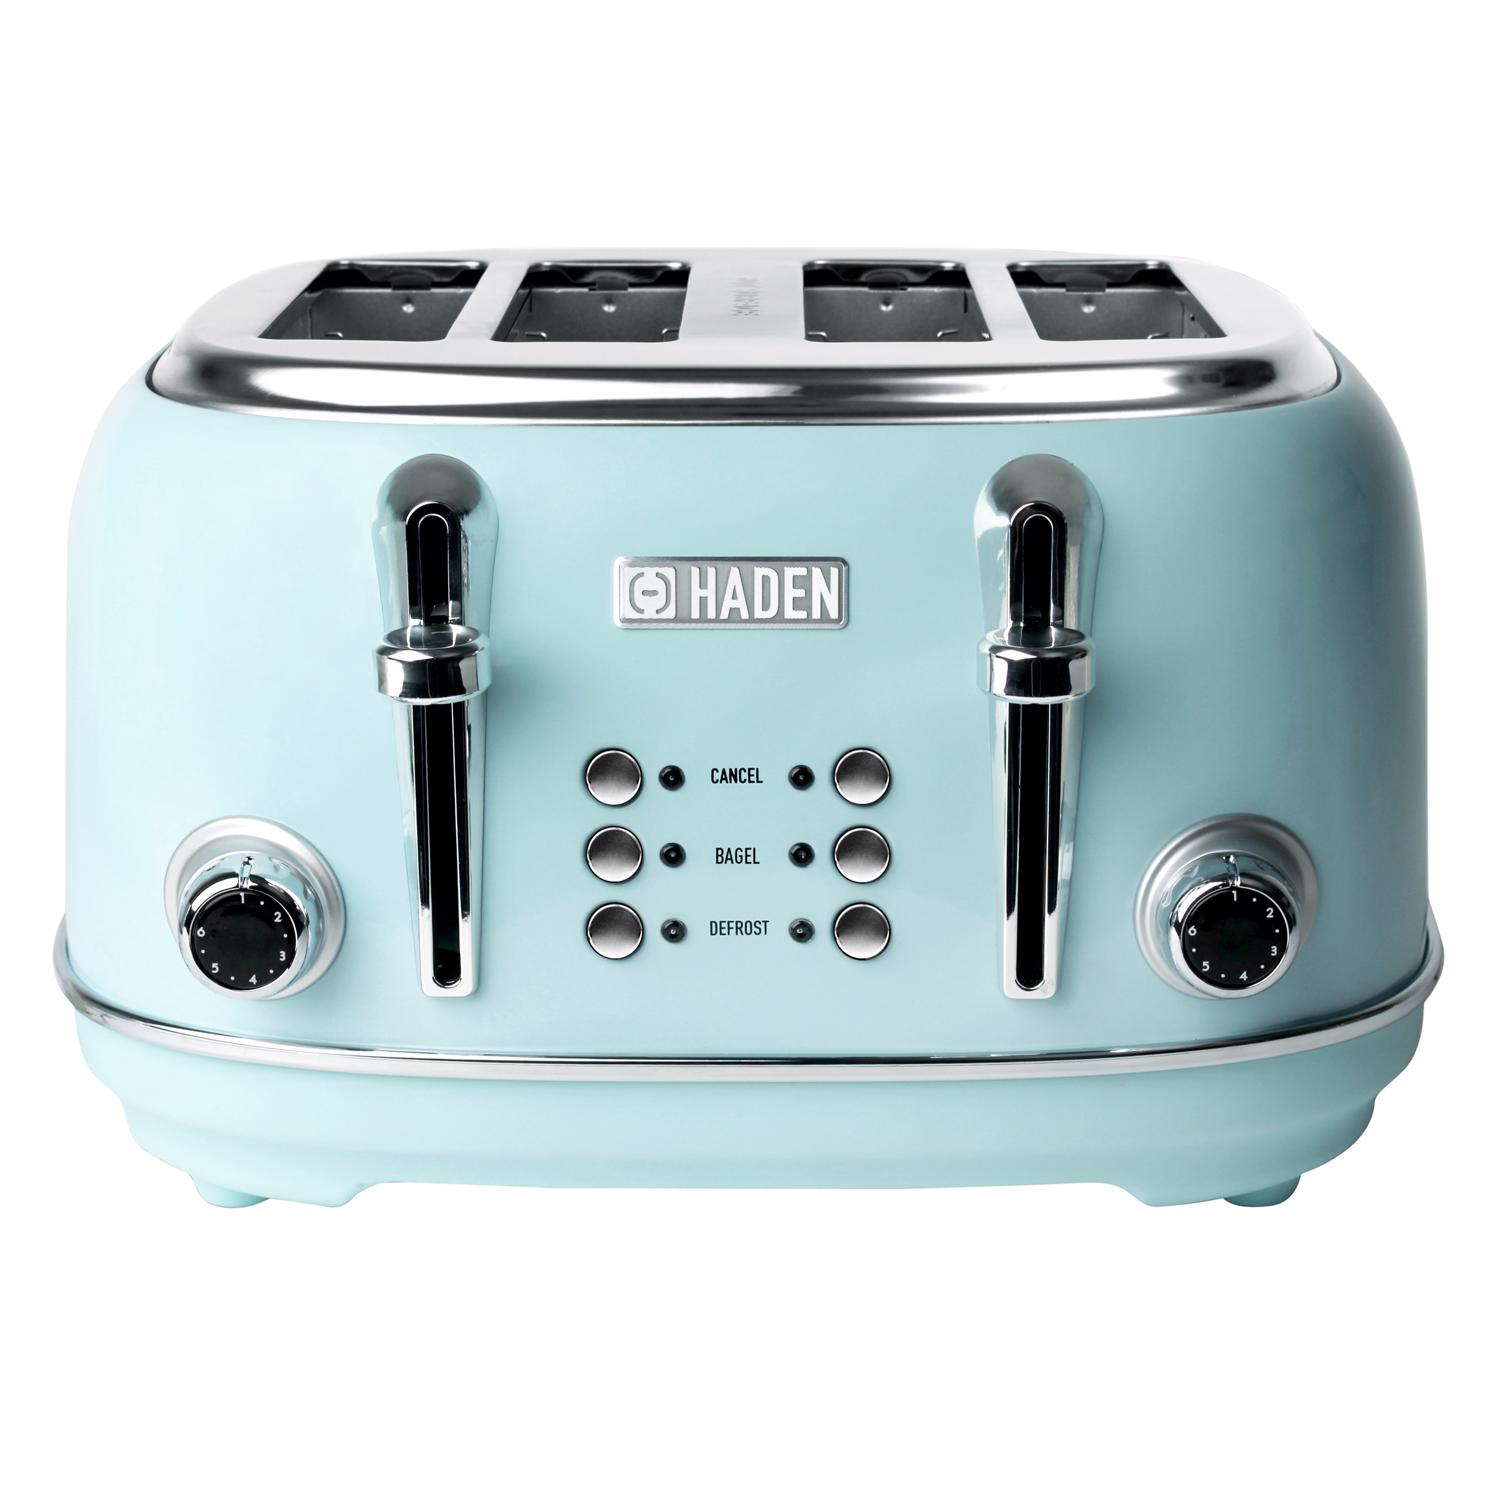 Photos - Toaster Haden Heritage Stainless Steel Turquoise 4 slot  7.5 in. H X 12.5 i 